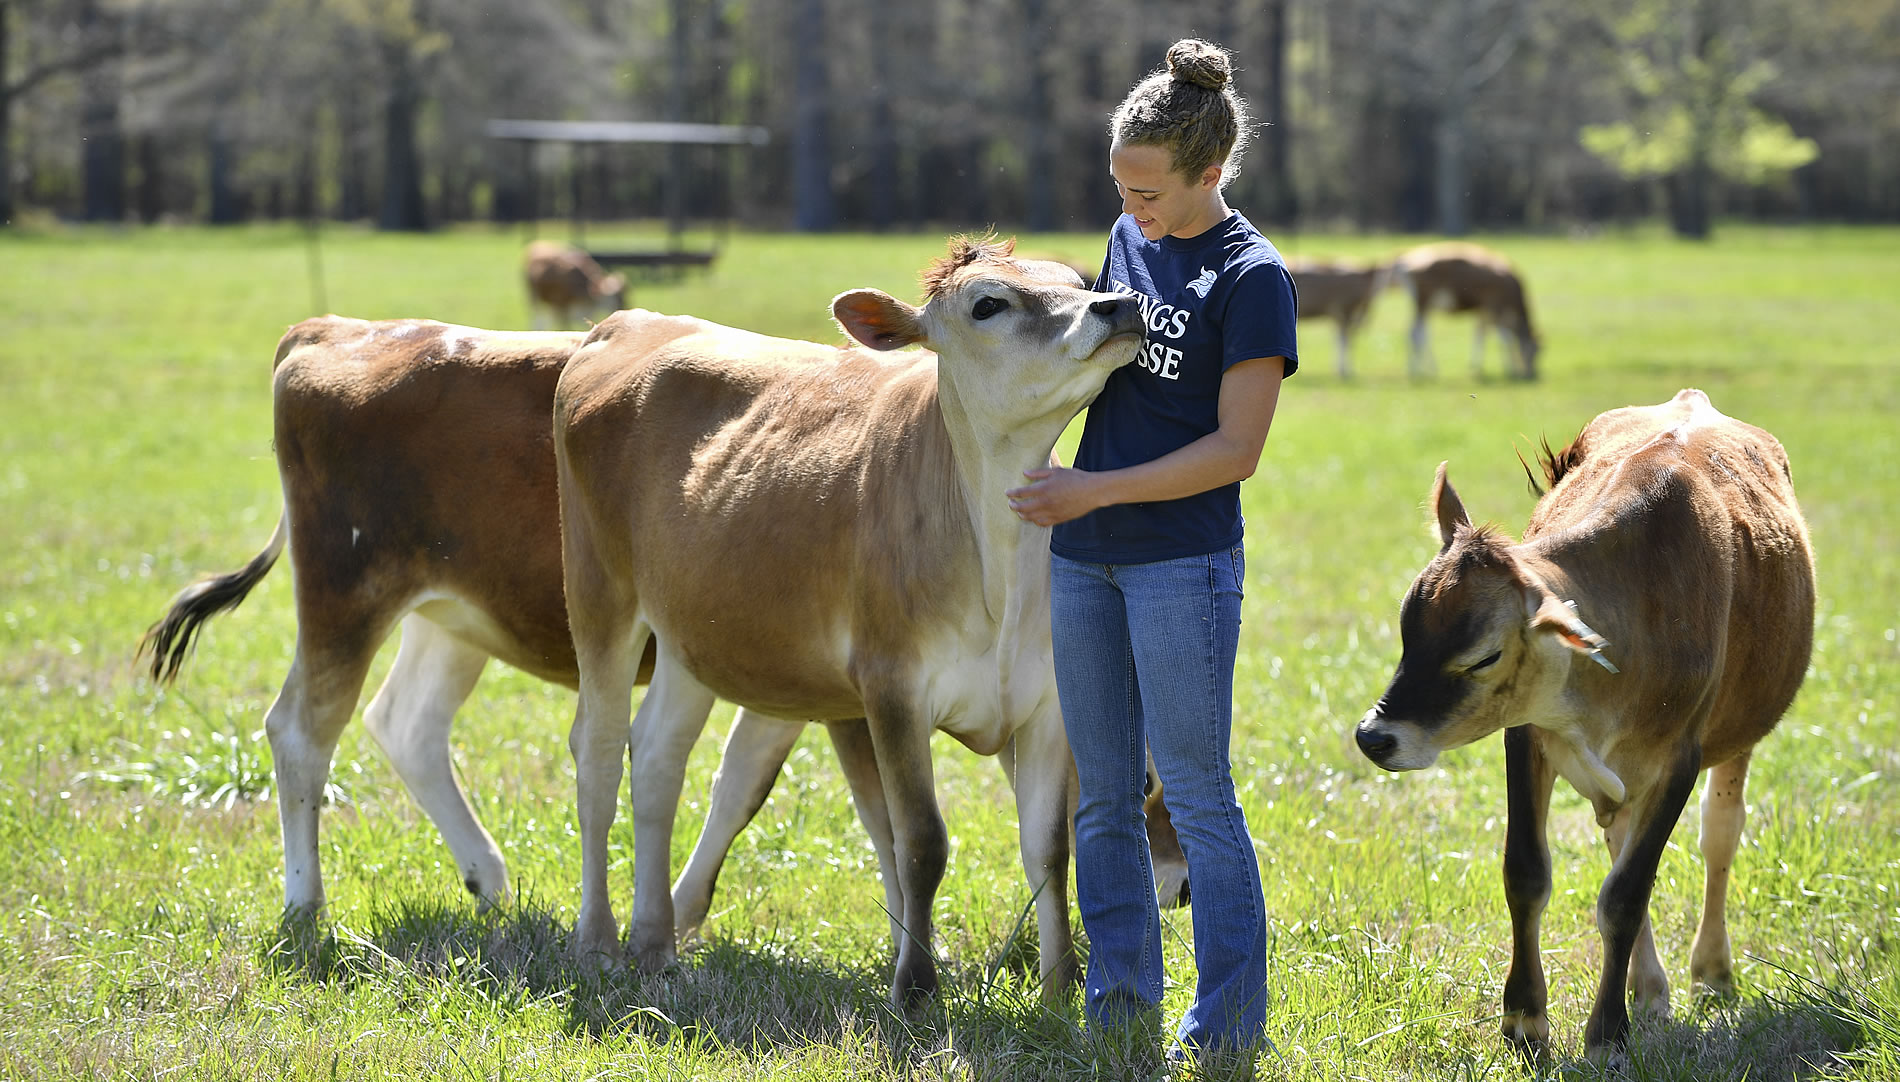 Careers with Animals: 20 Ways to Turn Your Passion into a Profession